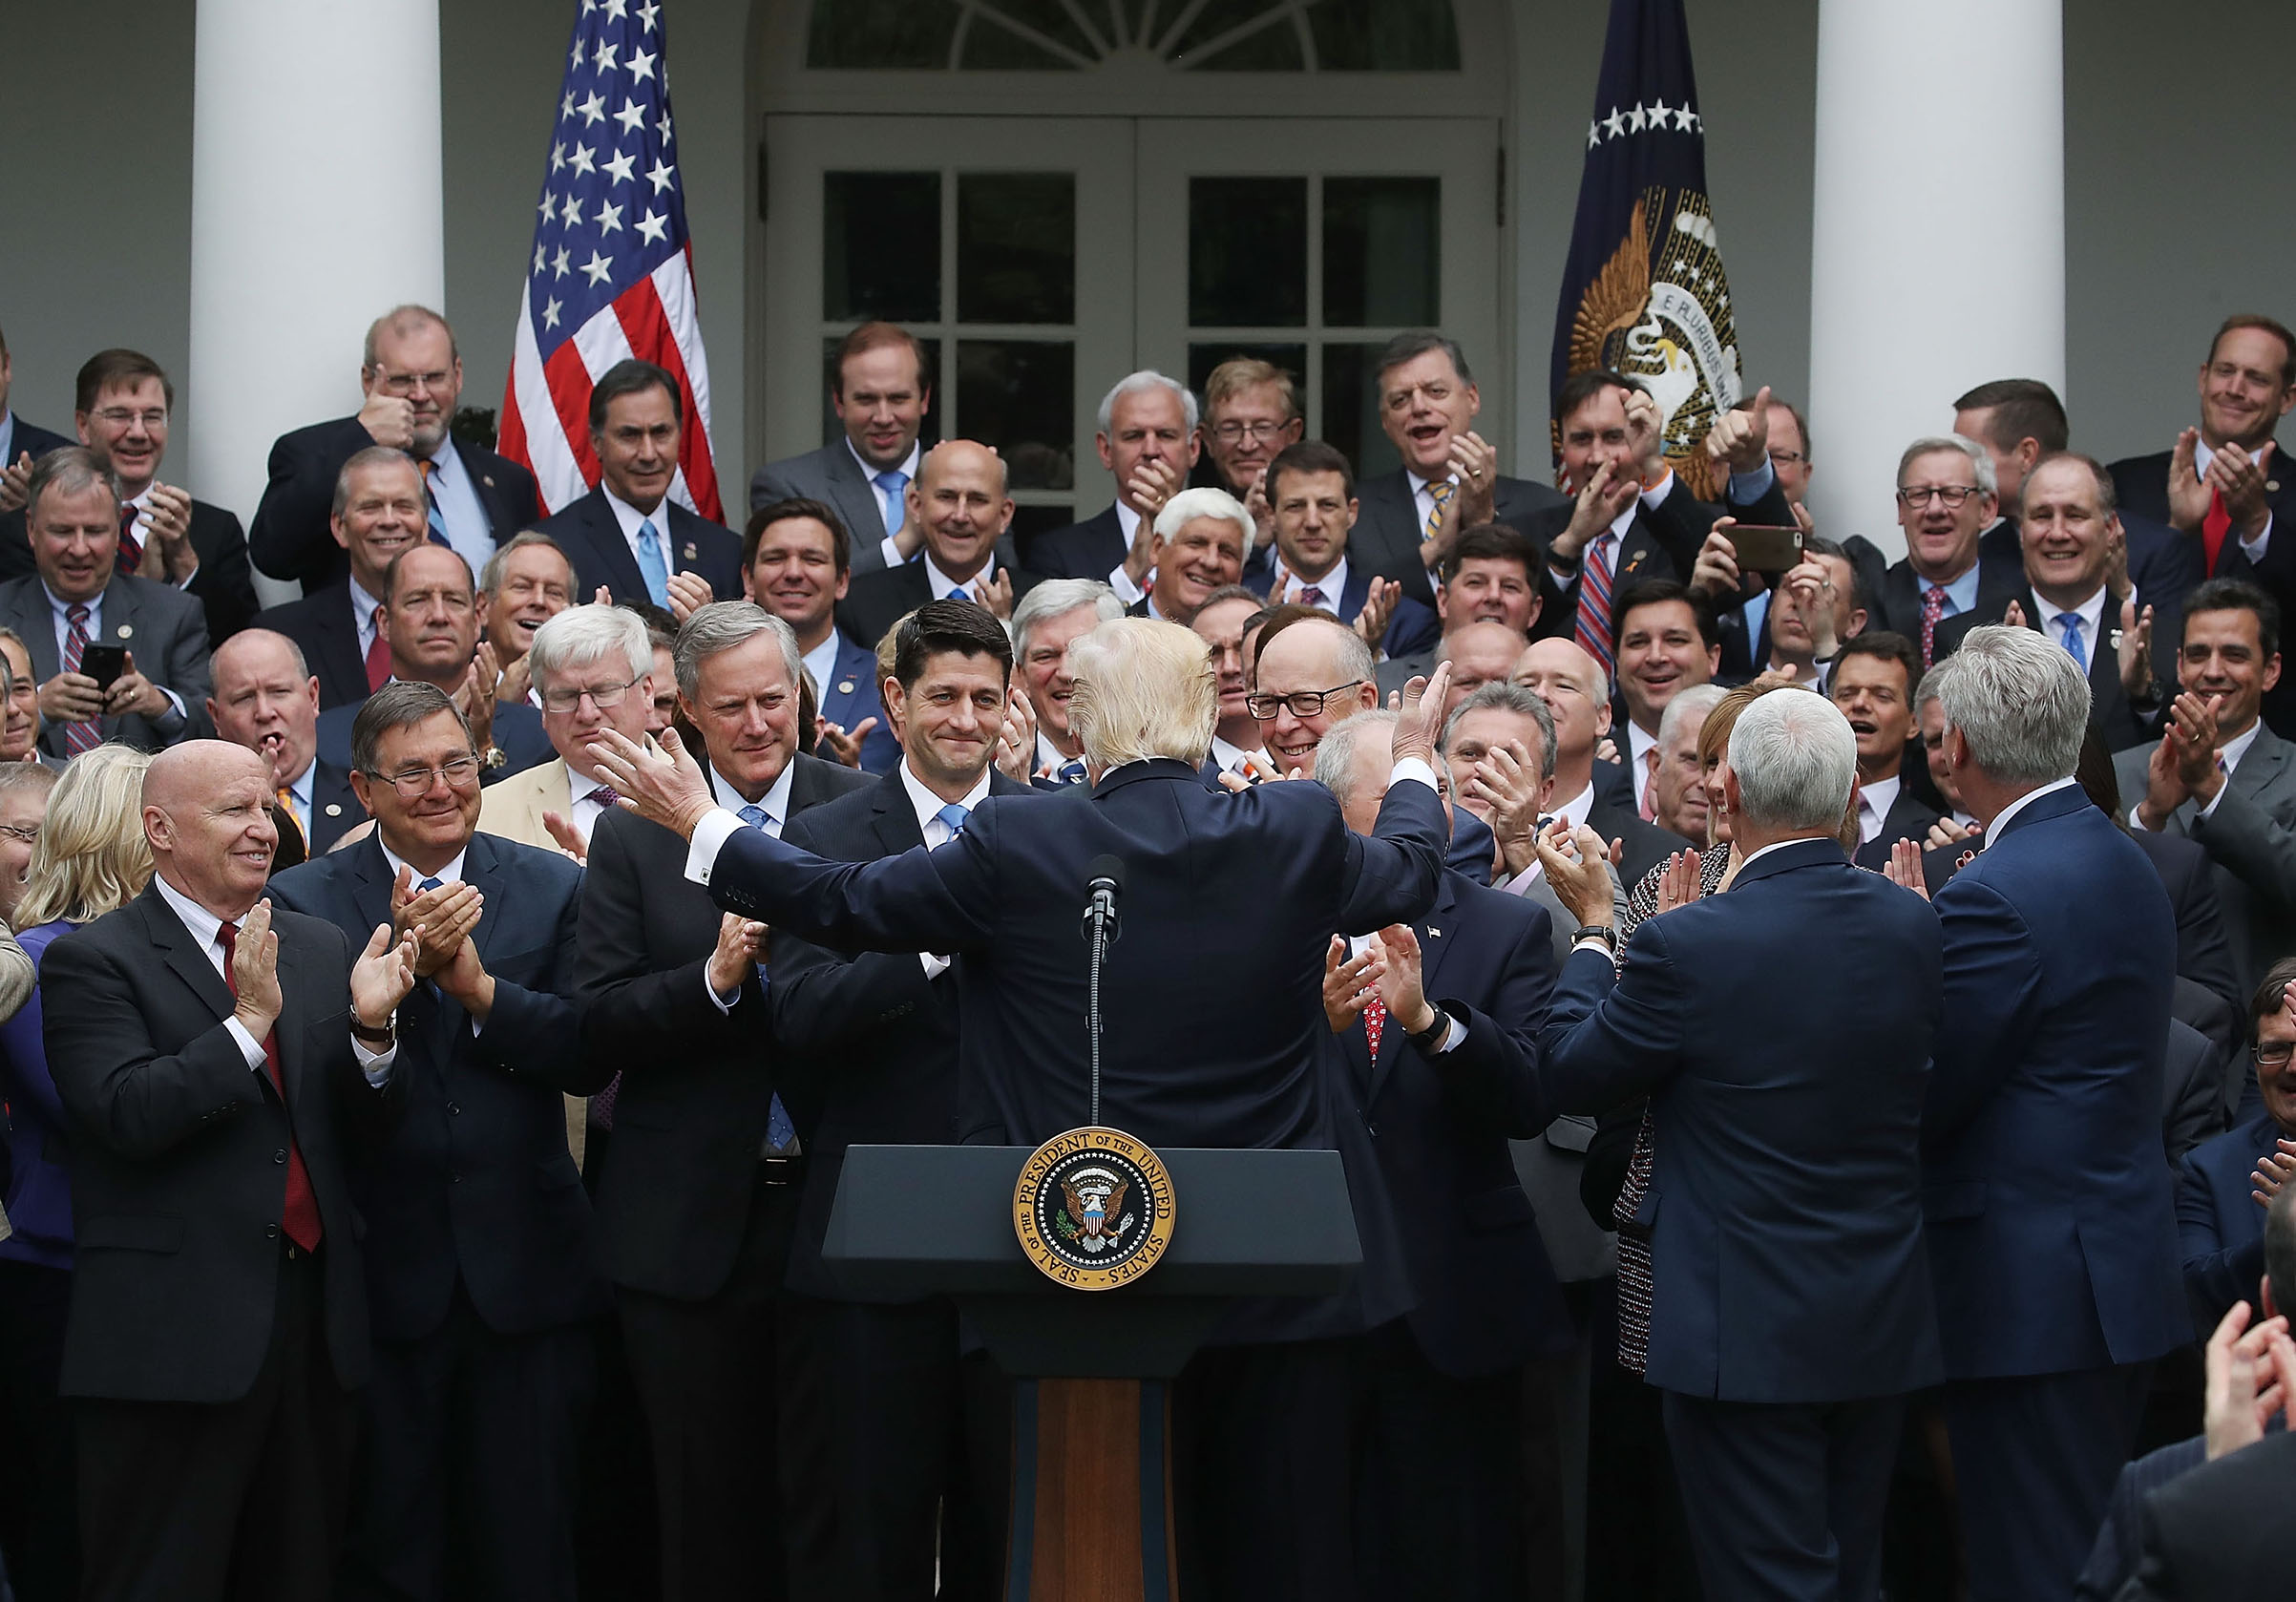 President Donald Trump congratulates House Republicans after they passed legislation aimed at repealing and replacing ObamaCare on May 4, 2017. (Mark Wilson—Getty Images)